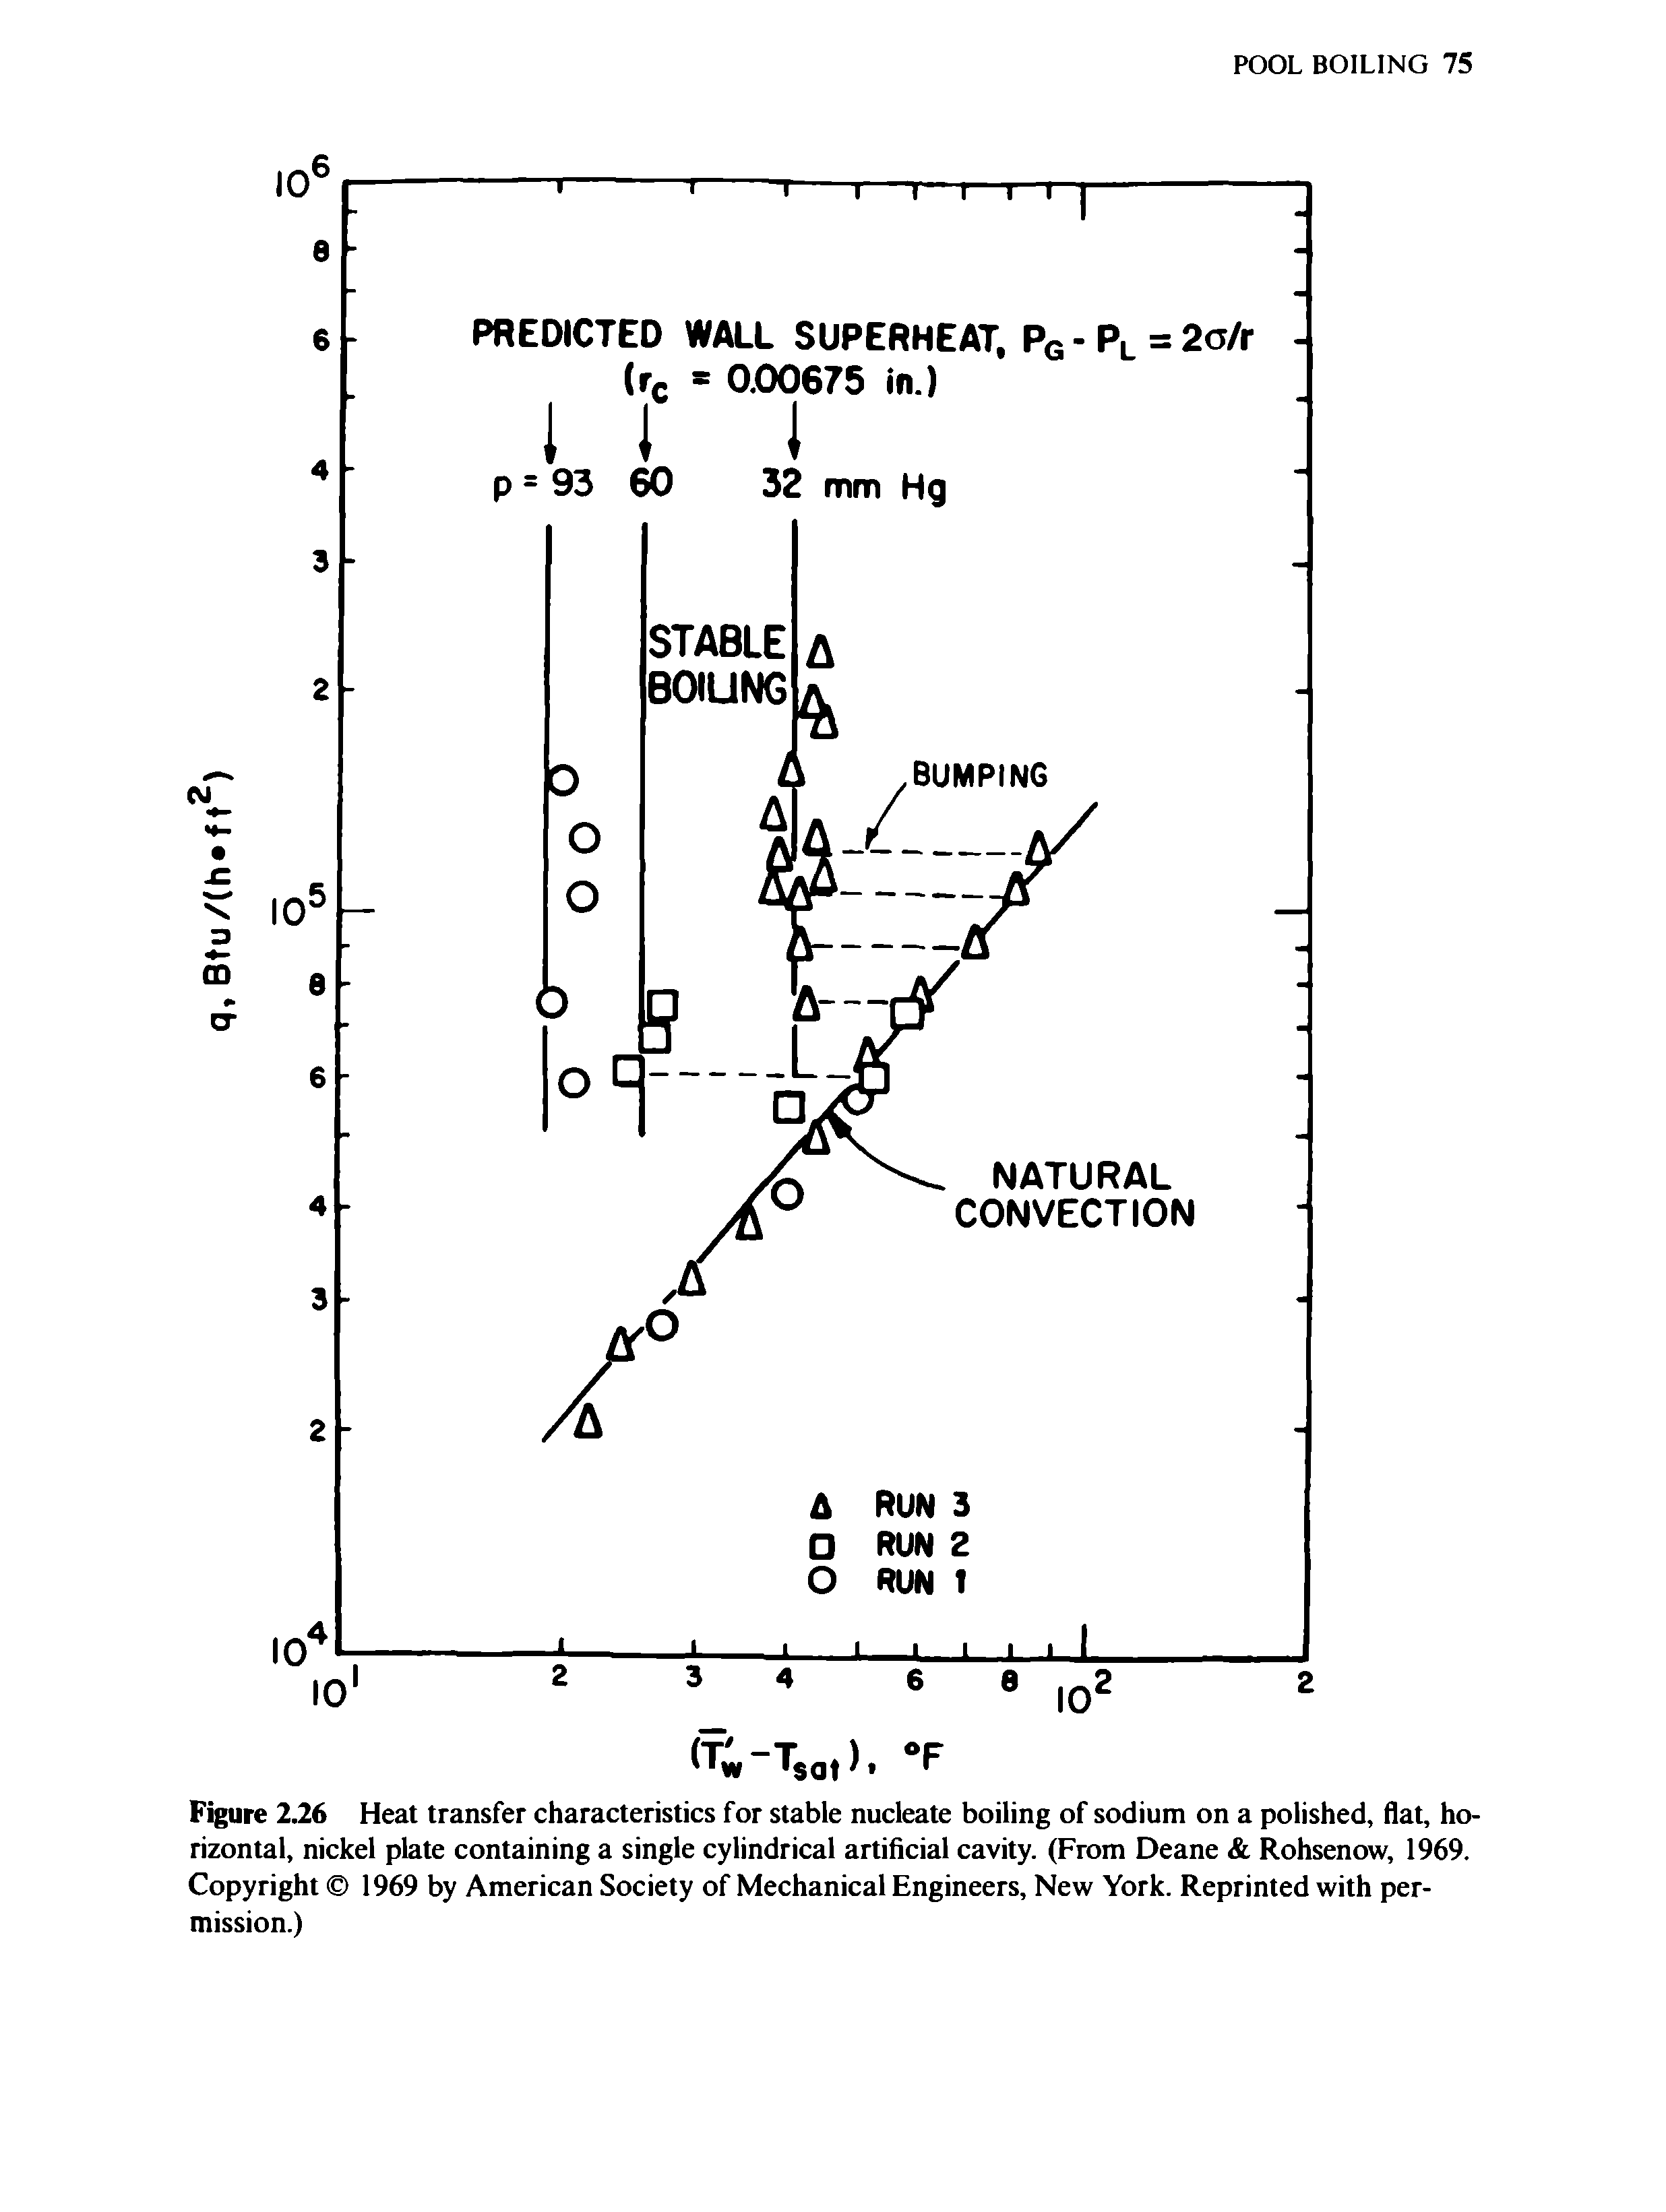 Figure 2.26 Heat transfer characteristics for stable nucleate boiling of sodium on a polished, flat, horizontal, nickel plate containing a single cylindrical artificial cavity. (From Deane Rohsenow, 1969. Copyright 1969 by American Society of Mechanical Engineers, New York. Reprinted with permission.)...